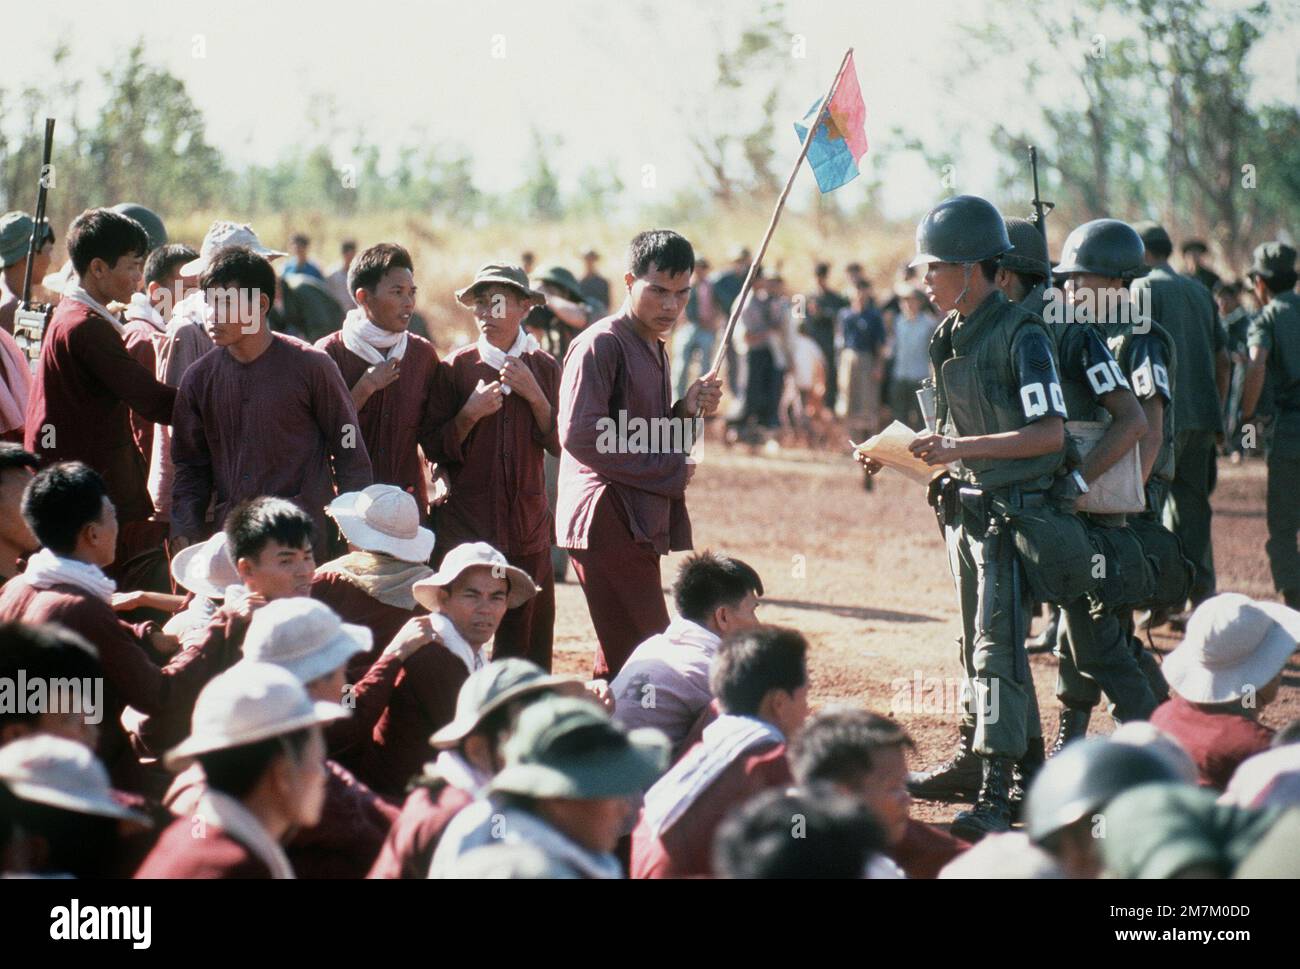 Viet Cong POWs, one with a Viet Cong flag, stand and sit at the exchange location. They were flown in on USAF C-130 aircraft from Bien Hoa Air Base. They will be exchanged for American and South Vietnamese POWs held by the Viet Cong forces. Subject Operation/Series: HOMECOMING Base: Loc Ninh Country: South Vietnam Stock Photo